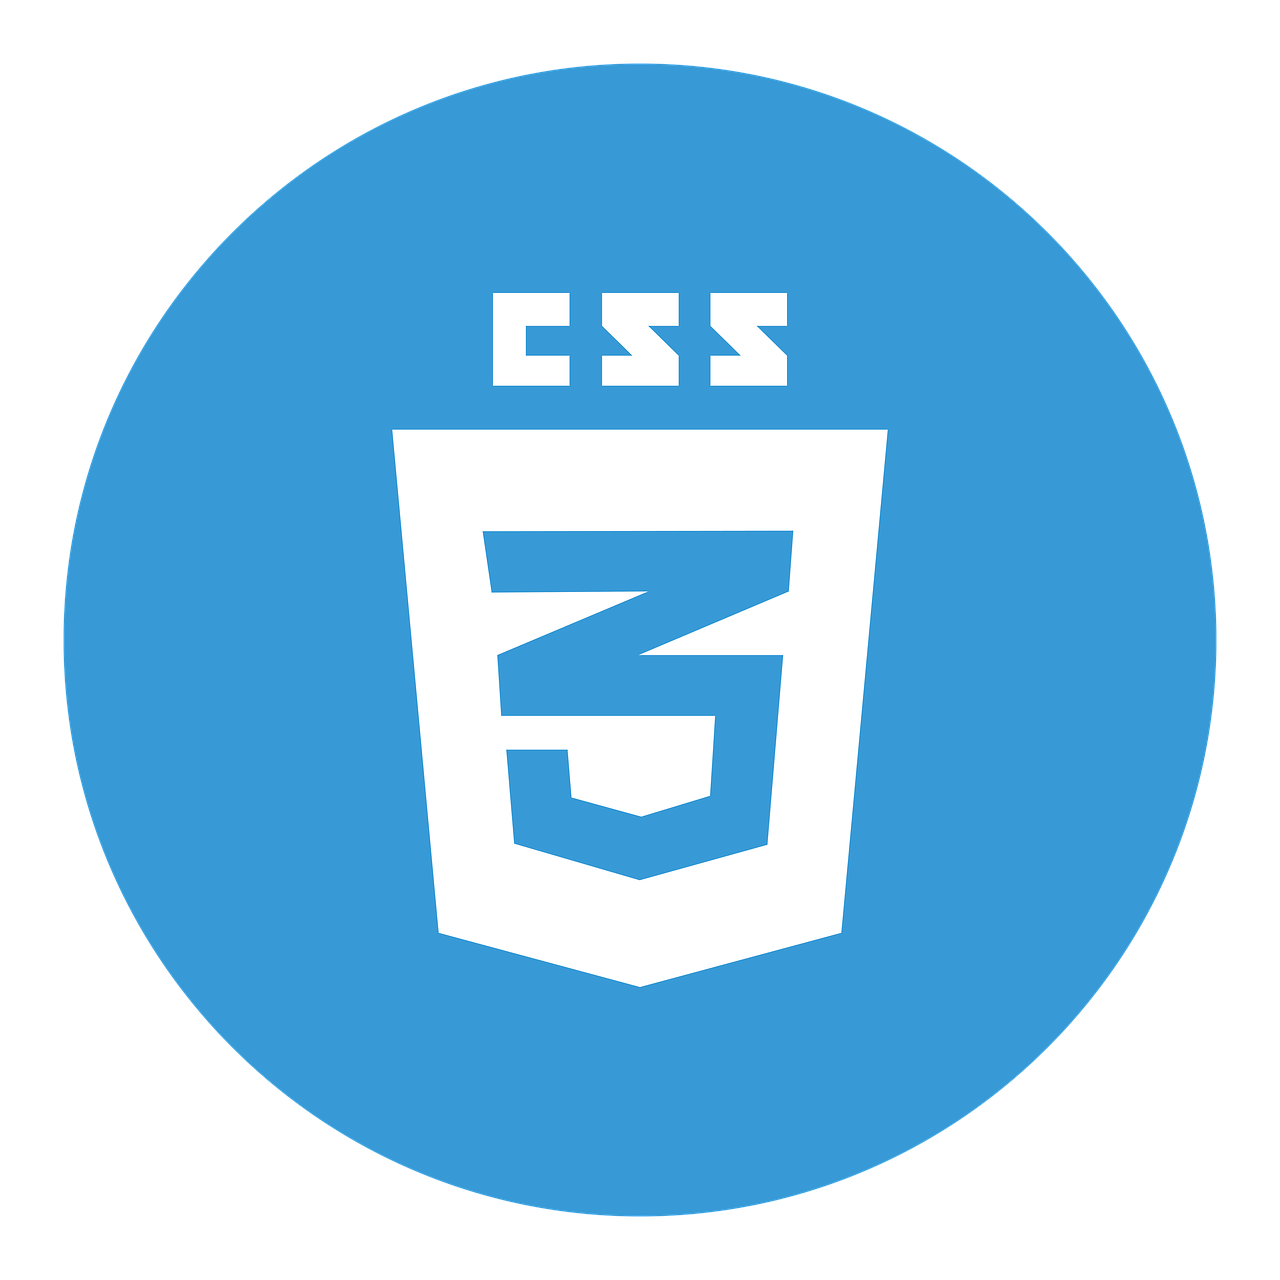 CSS 3 approved